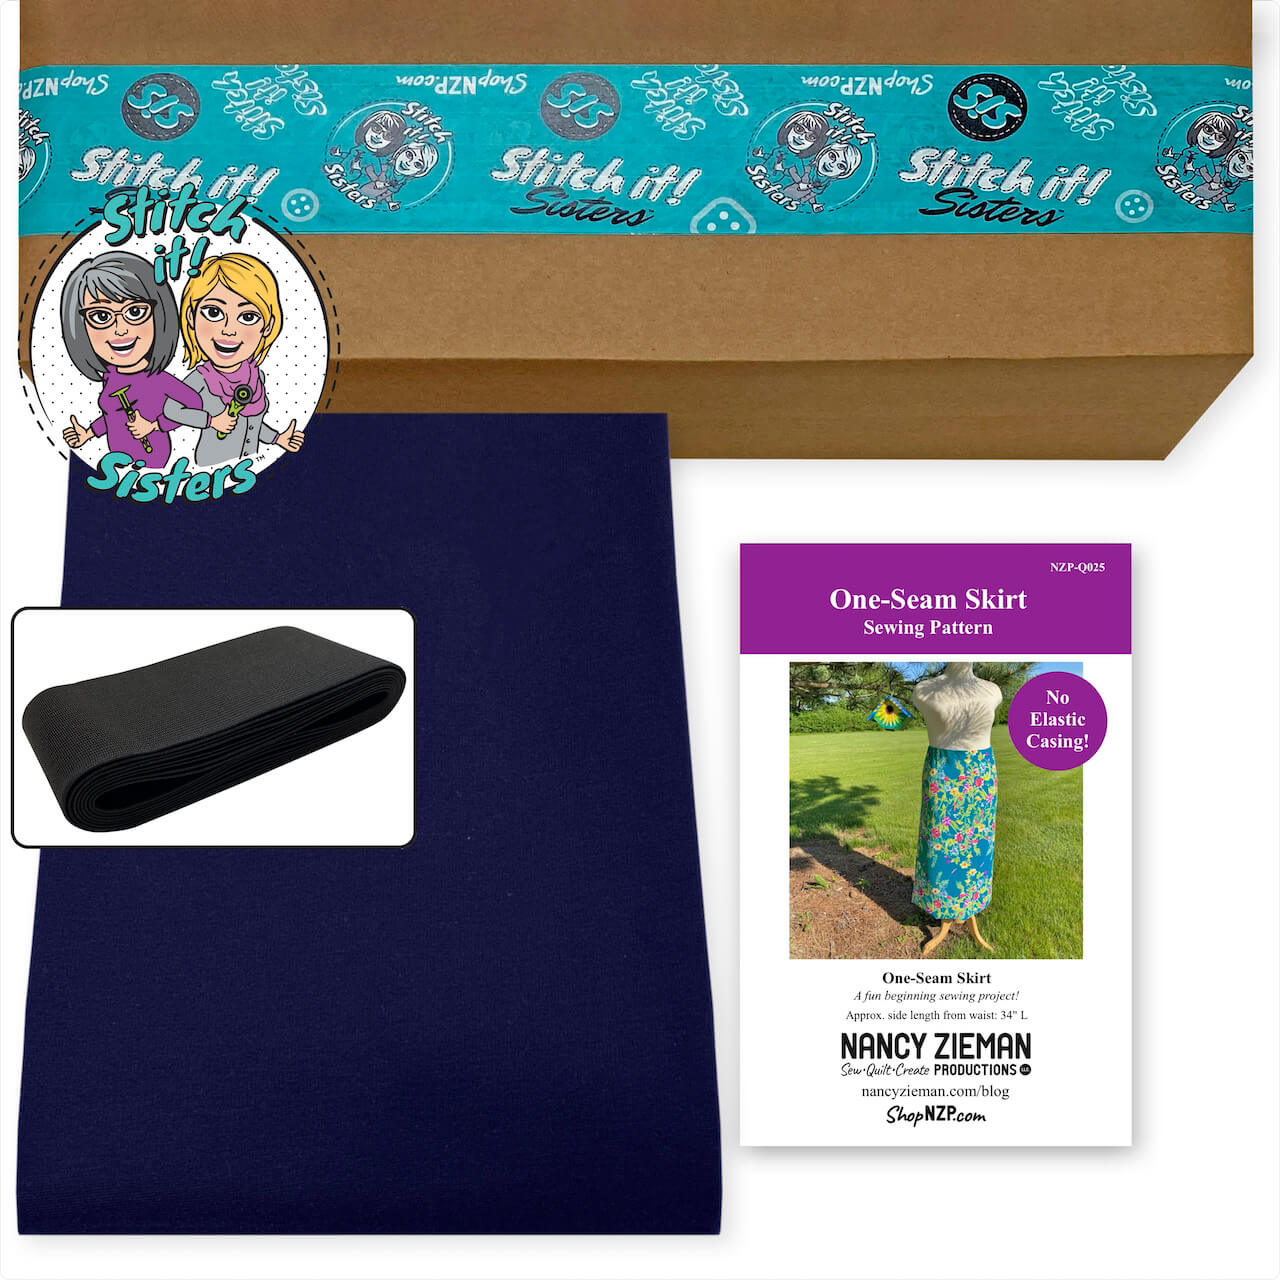 One Seam Skirt Sewing Project Bundle Box available at Nancy Zieman Productions at ShopNZP.com